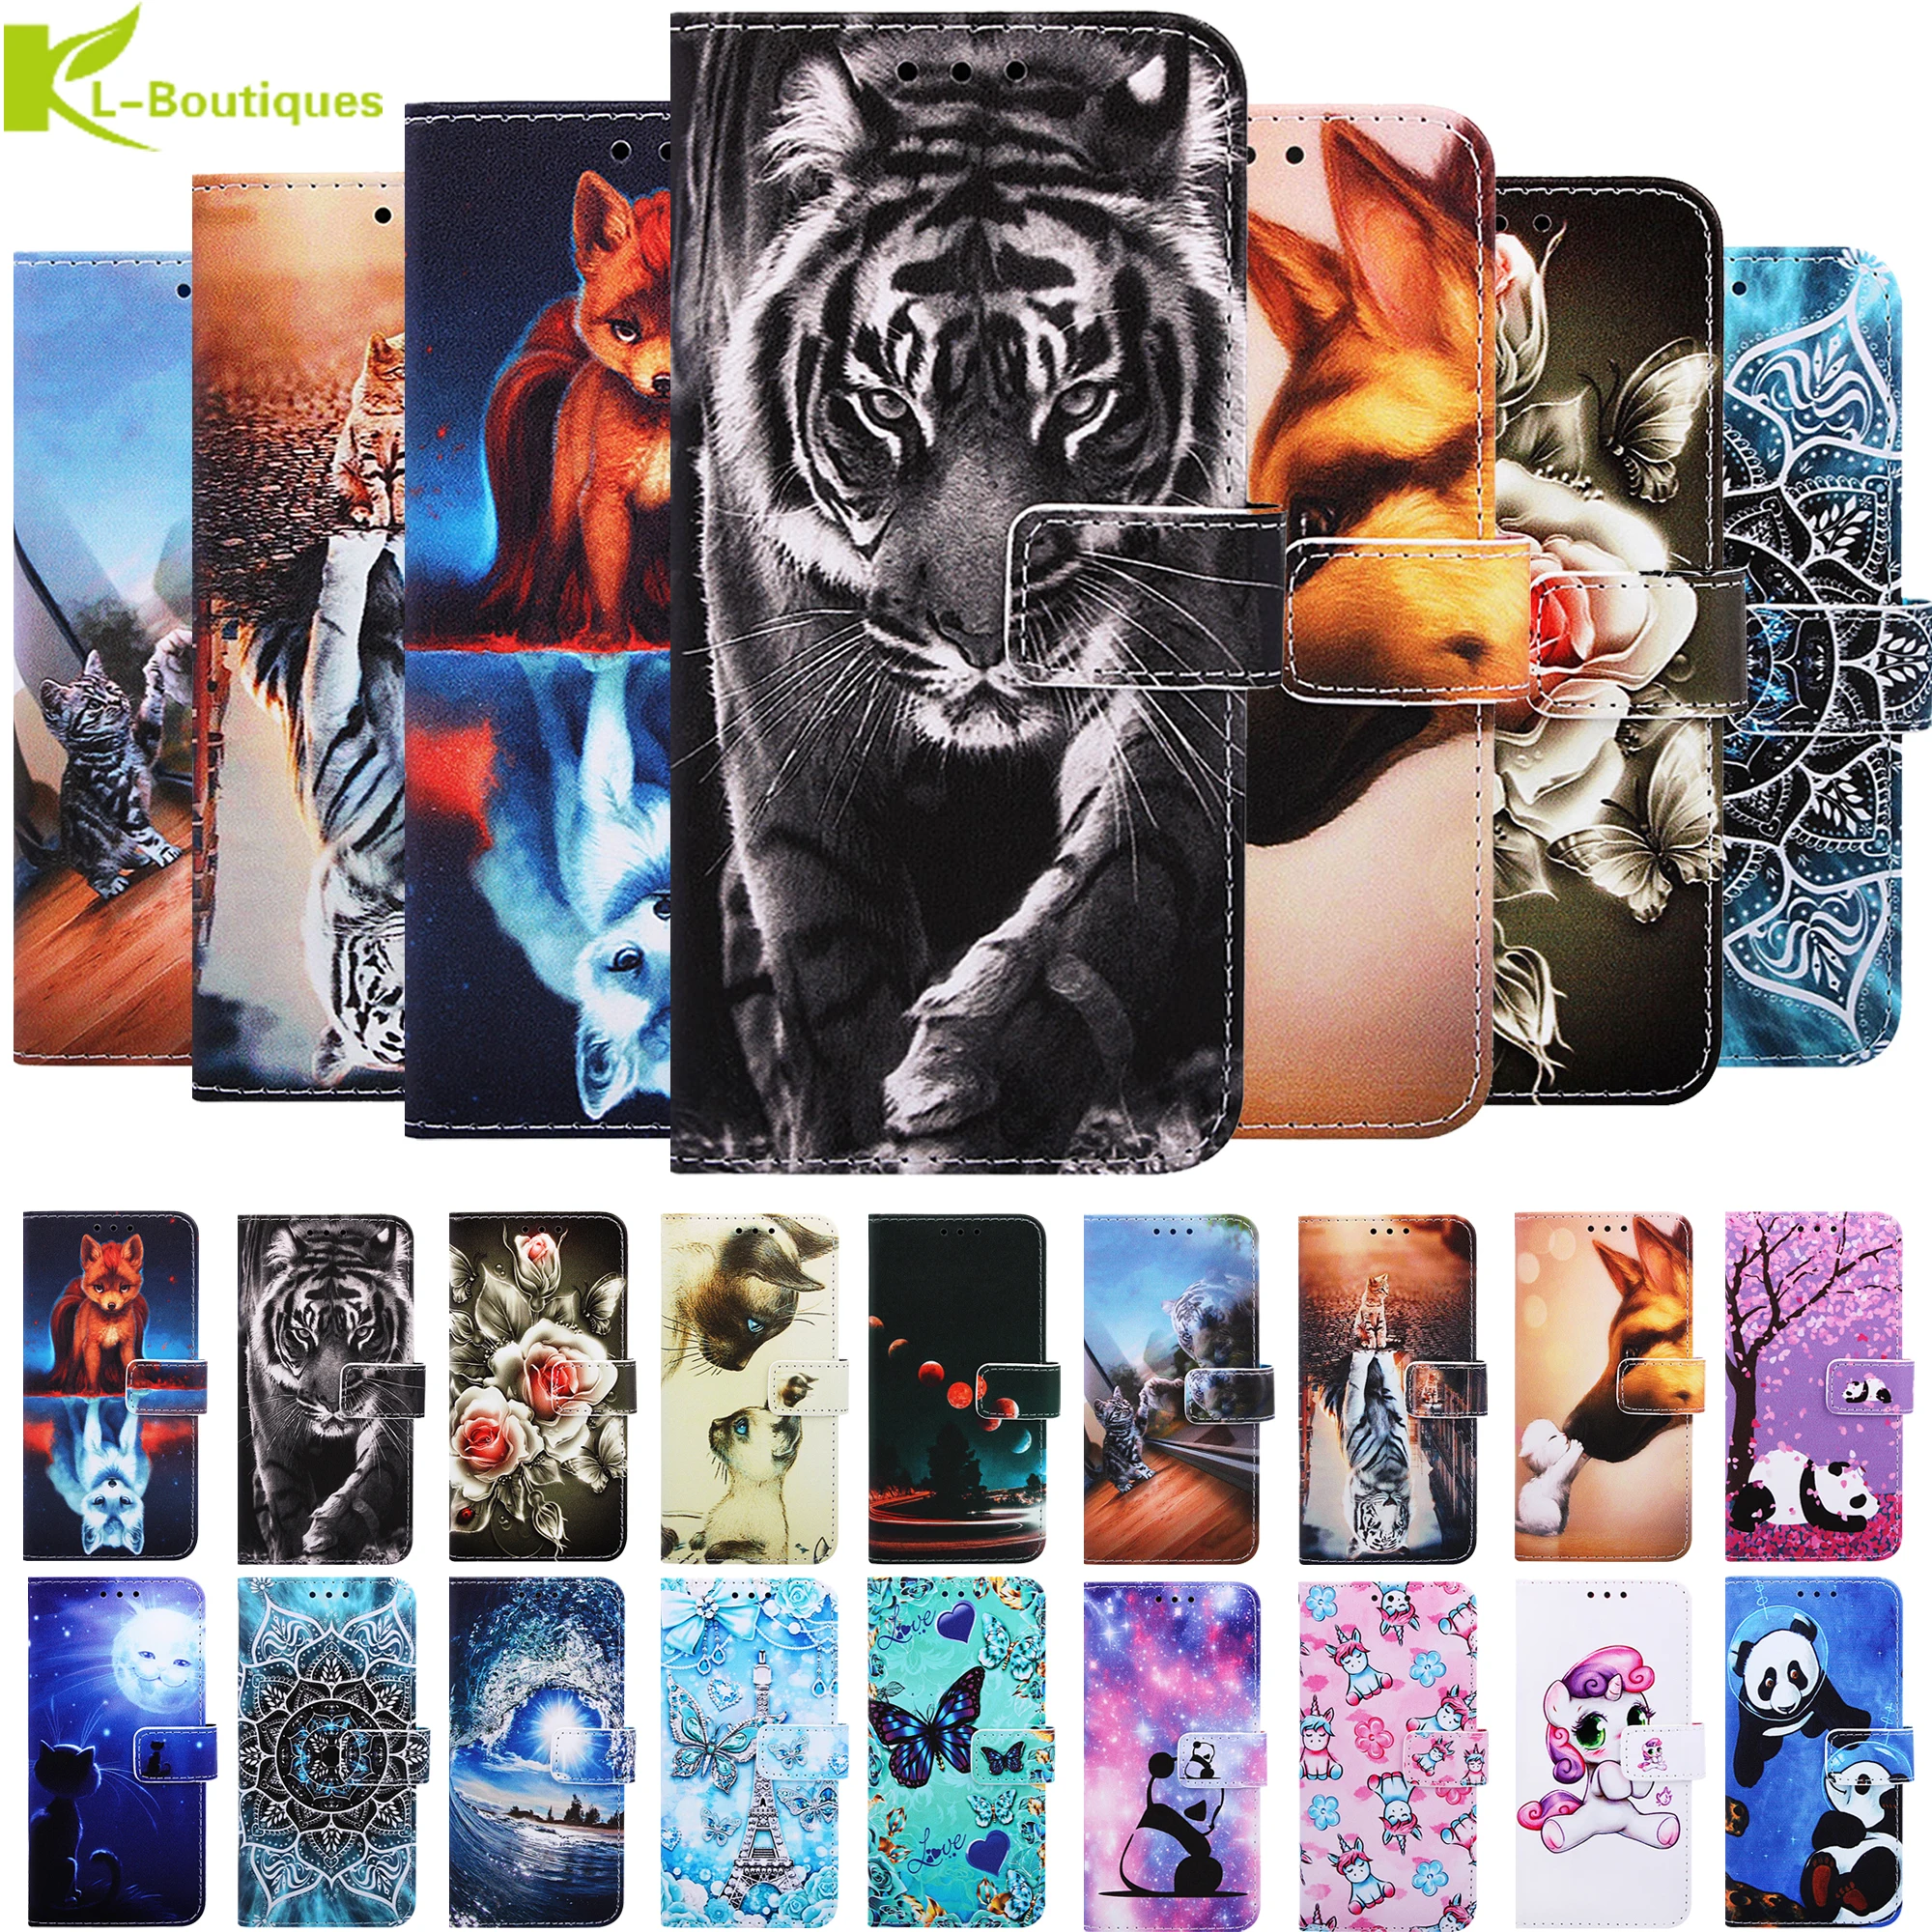 

Magnetic Painted case on for Xiaomi Redmi 8a 7a K20 Pro Note 9S 8T 7 Pro Cases capa Xiomi Mi 9T 9 t Pro Book stand leather cover